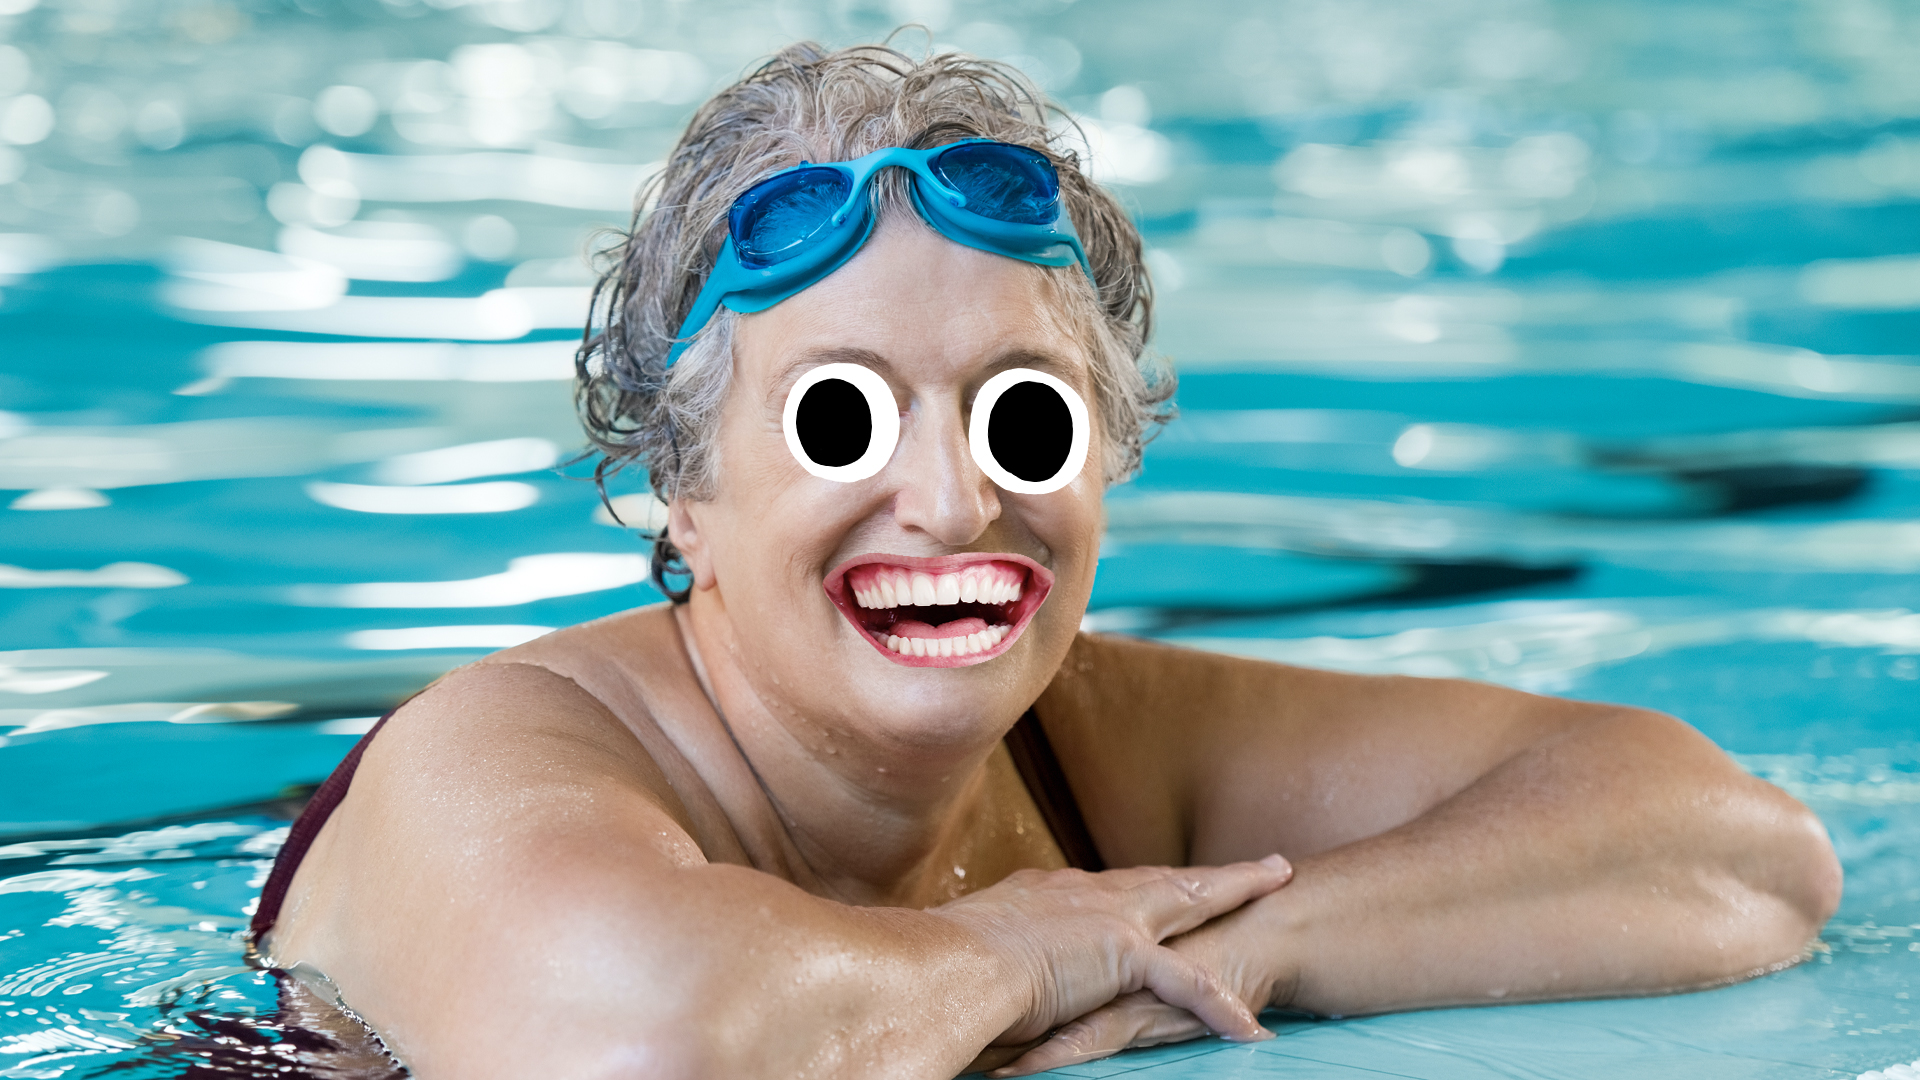 A woman in a swimming pool